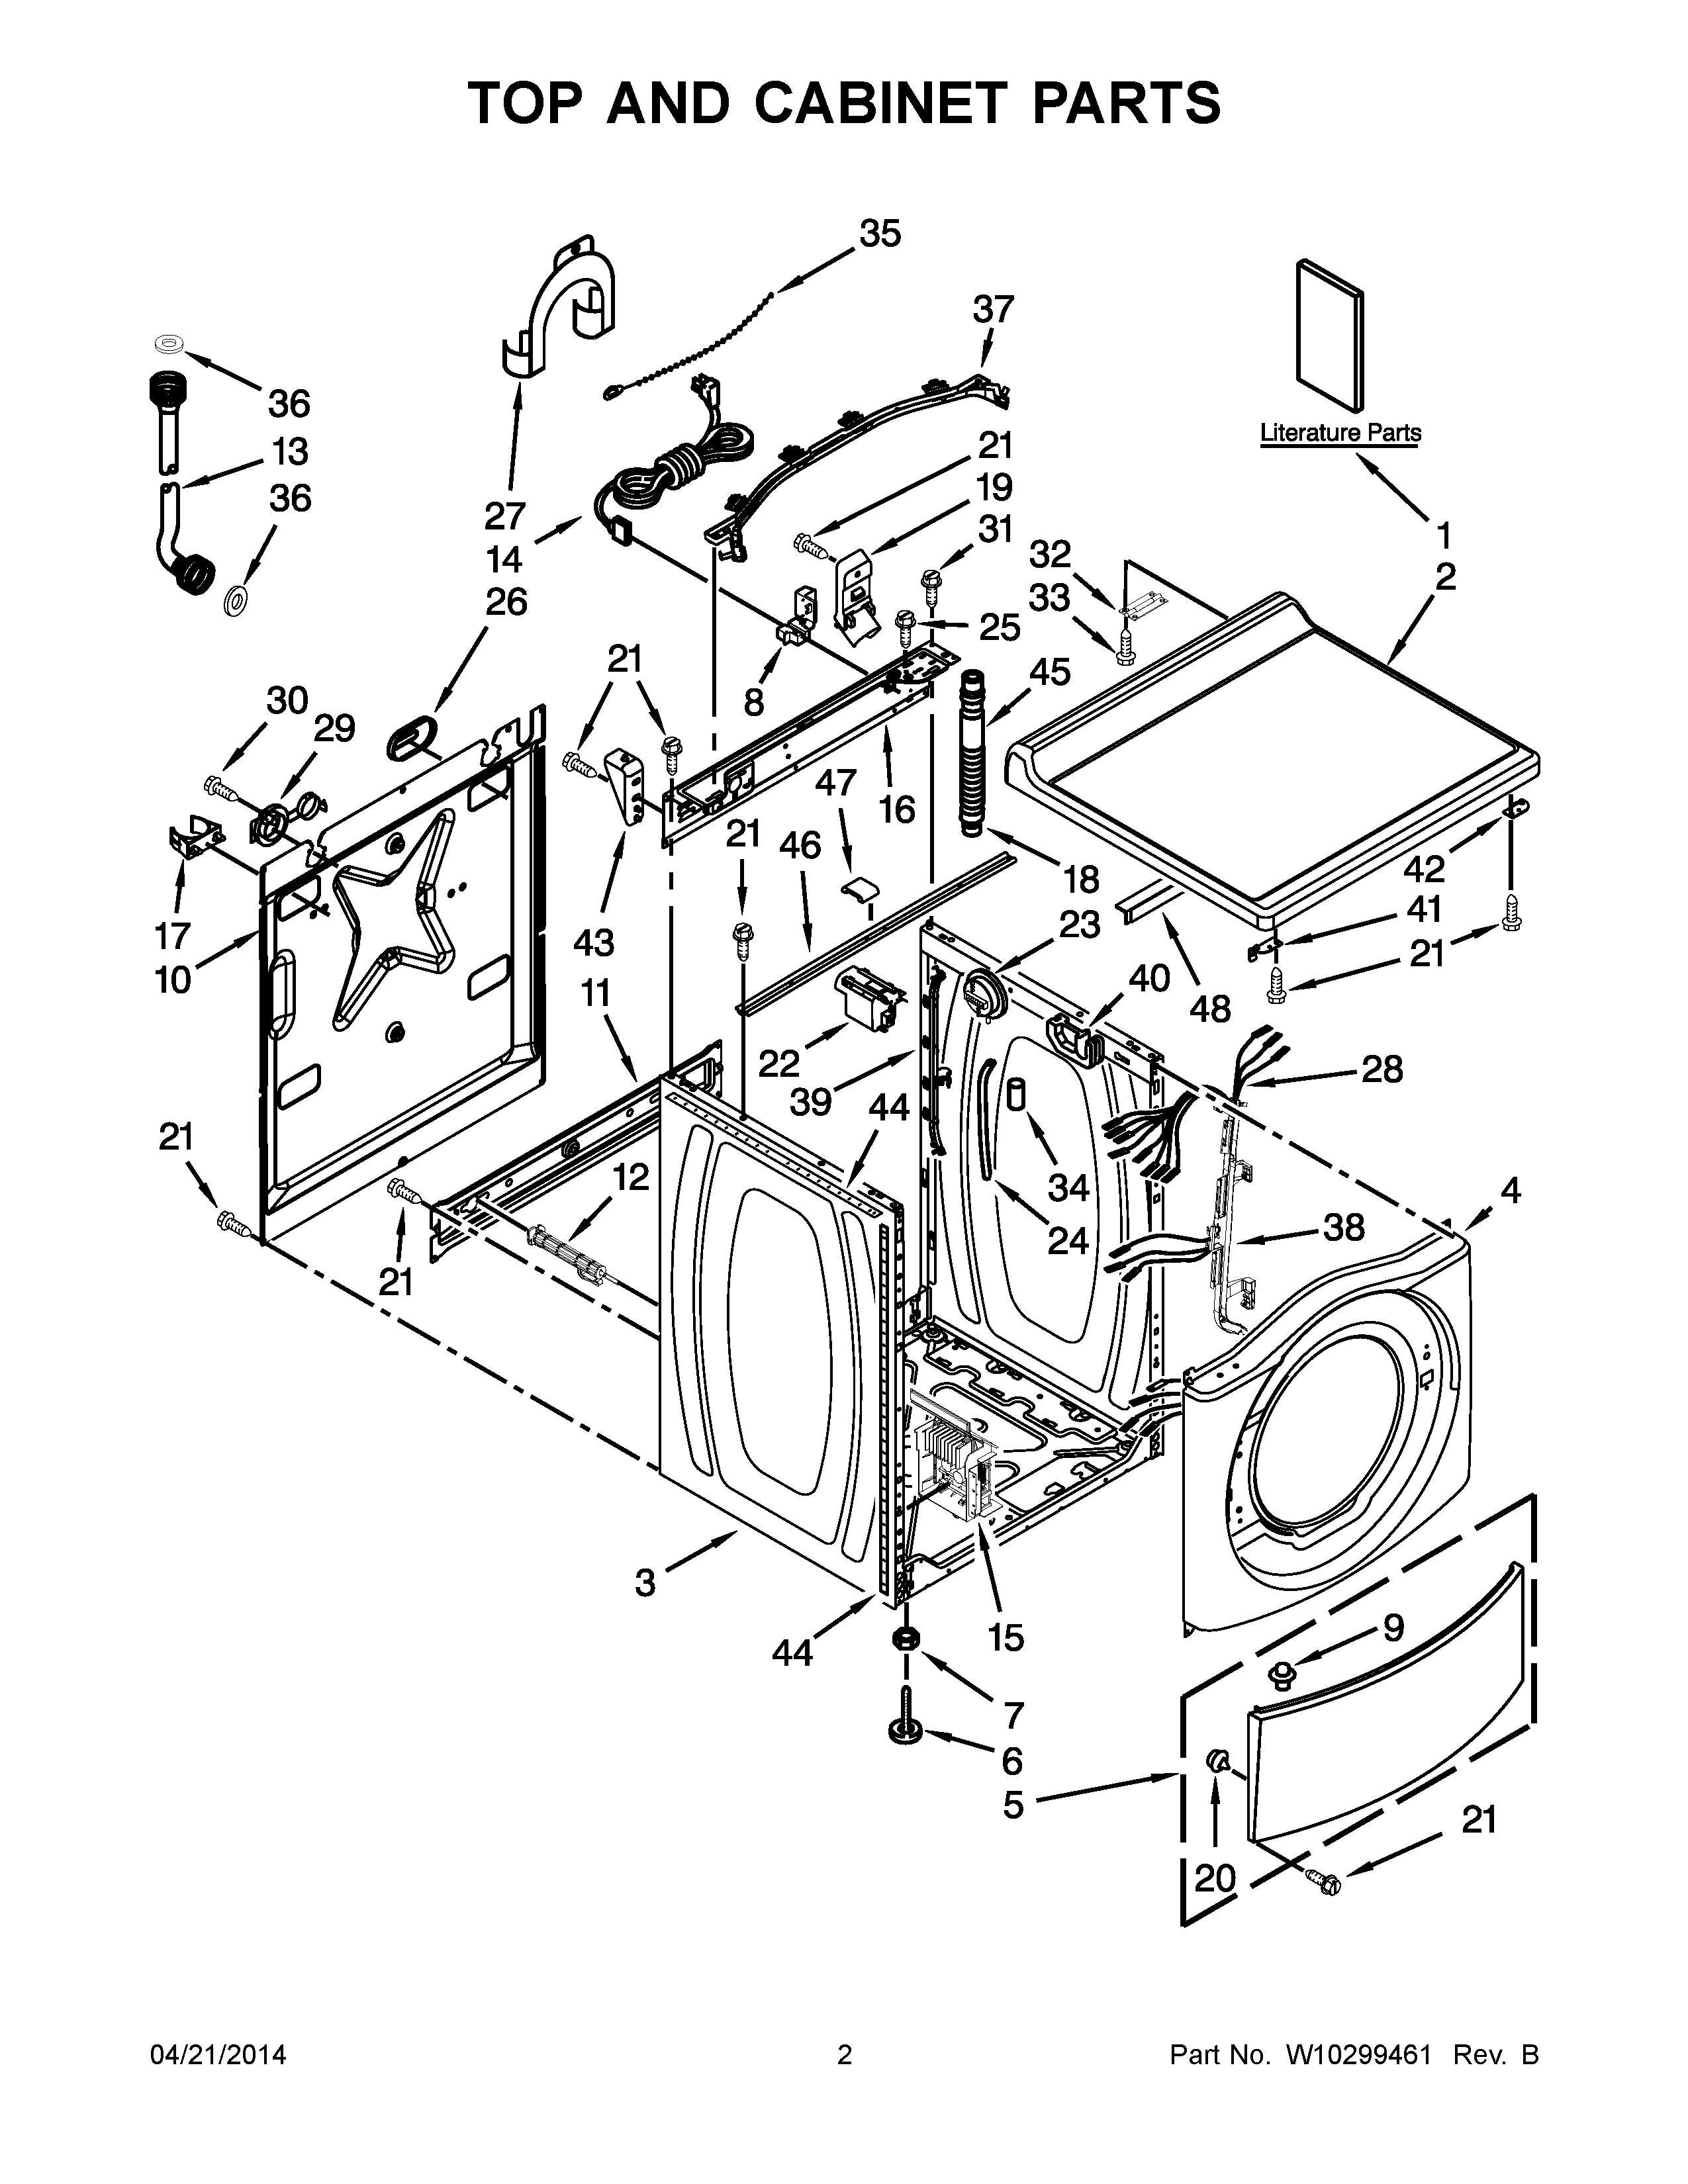 02 - TOP AND CABINET PARTS